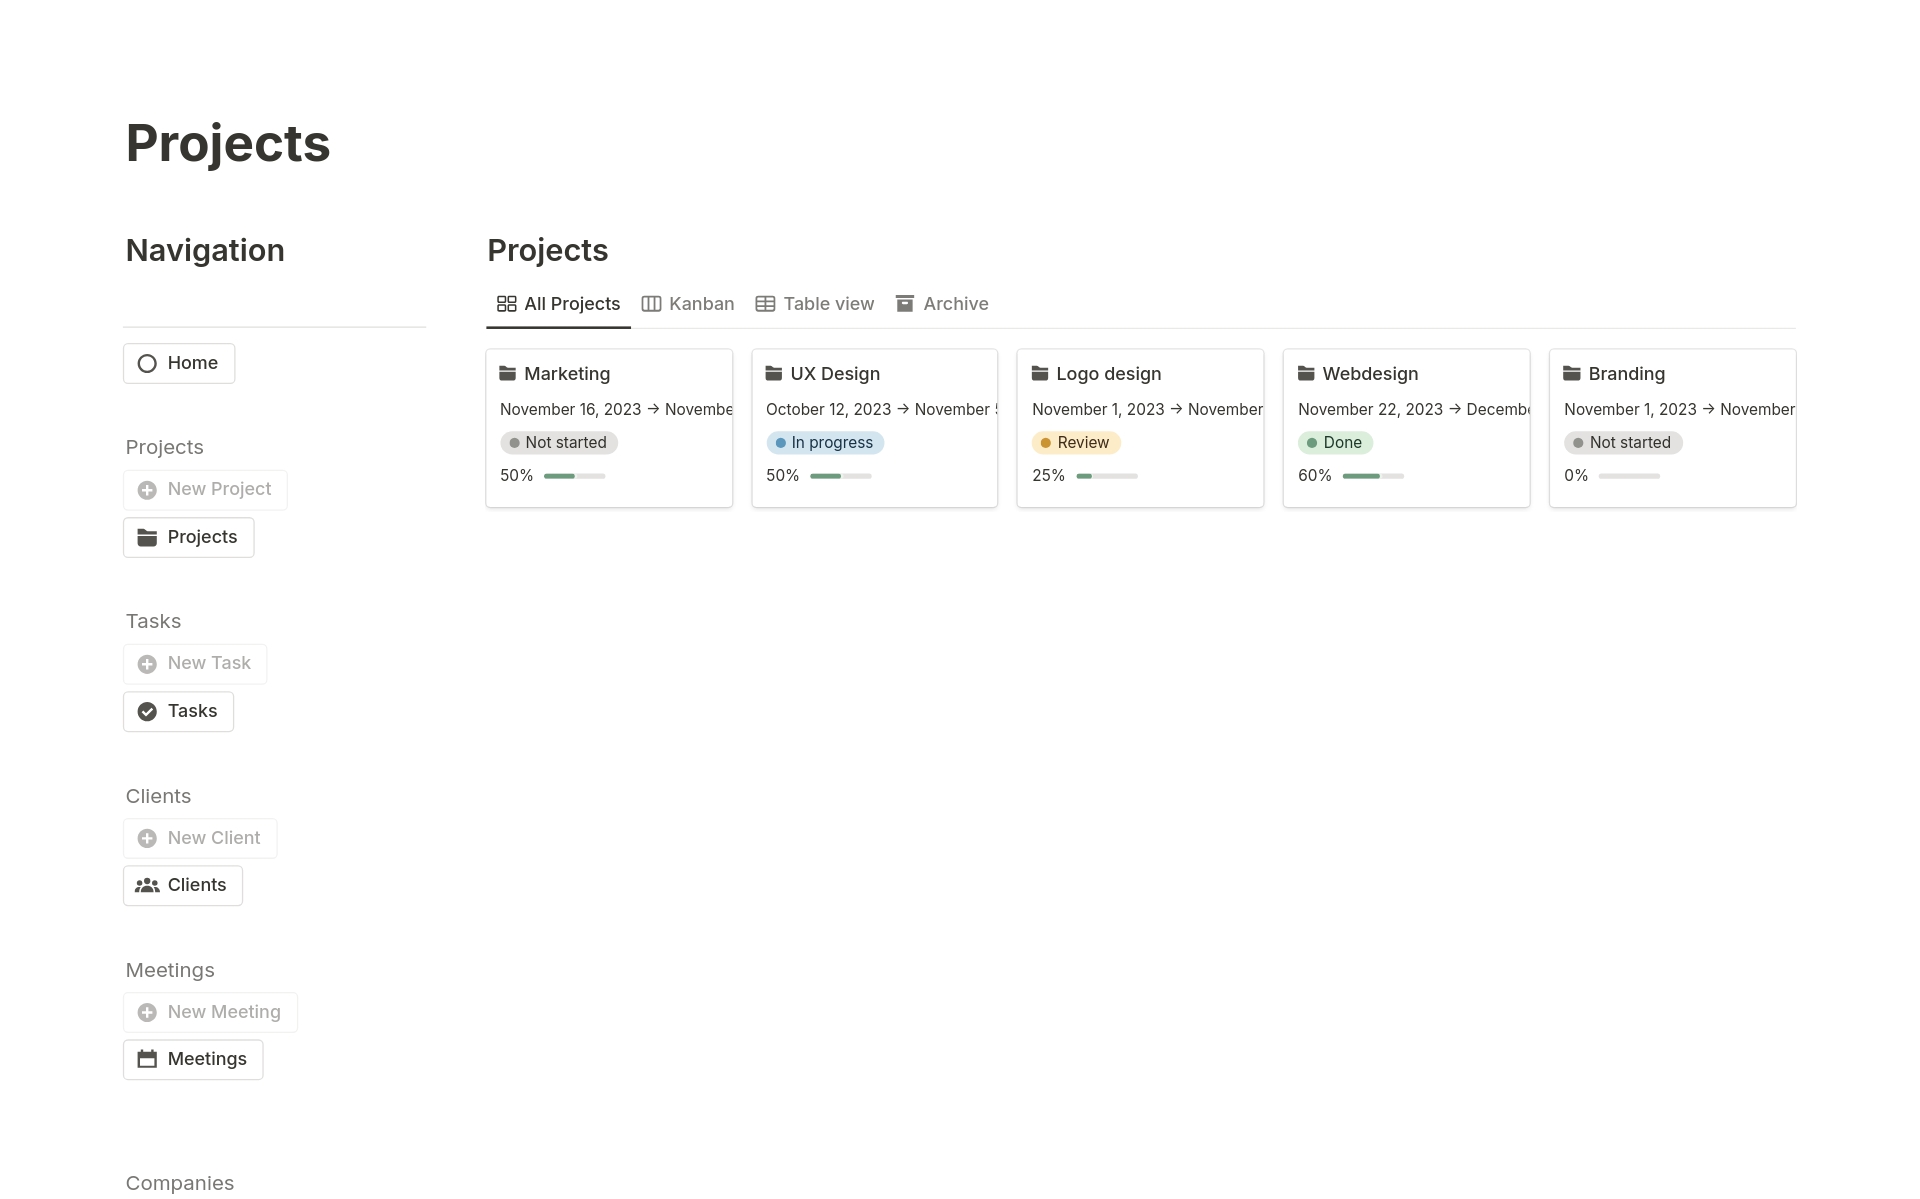 Manage your Clients and Project management process with this CRM, Clients, and Project Management Template!